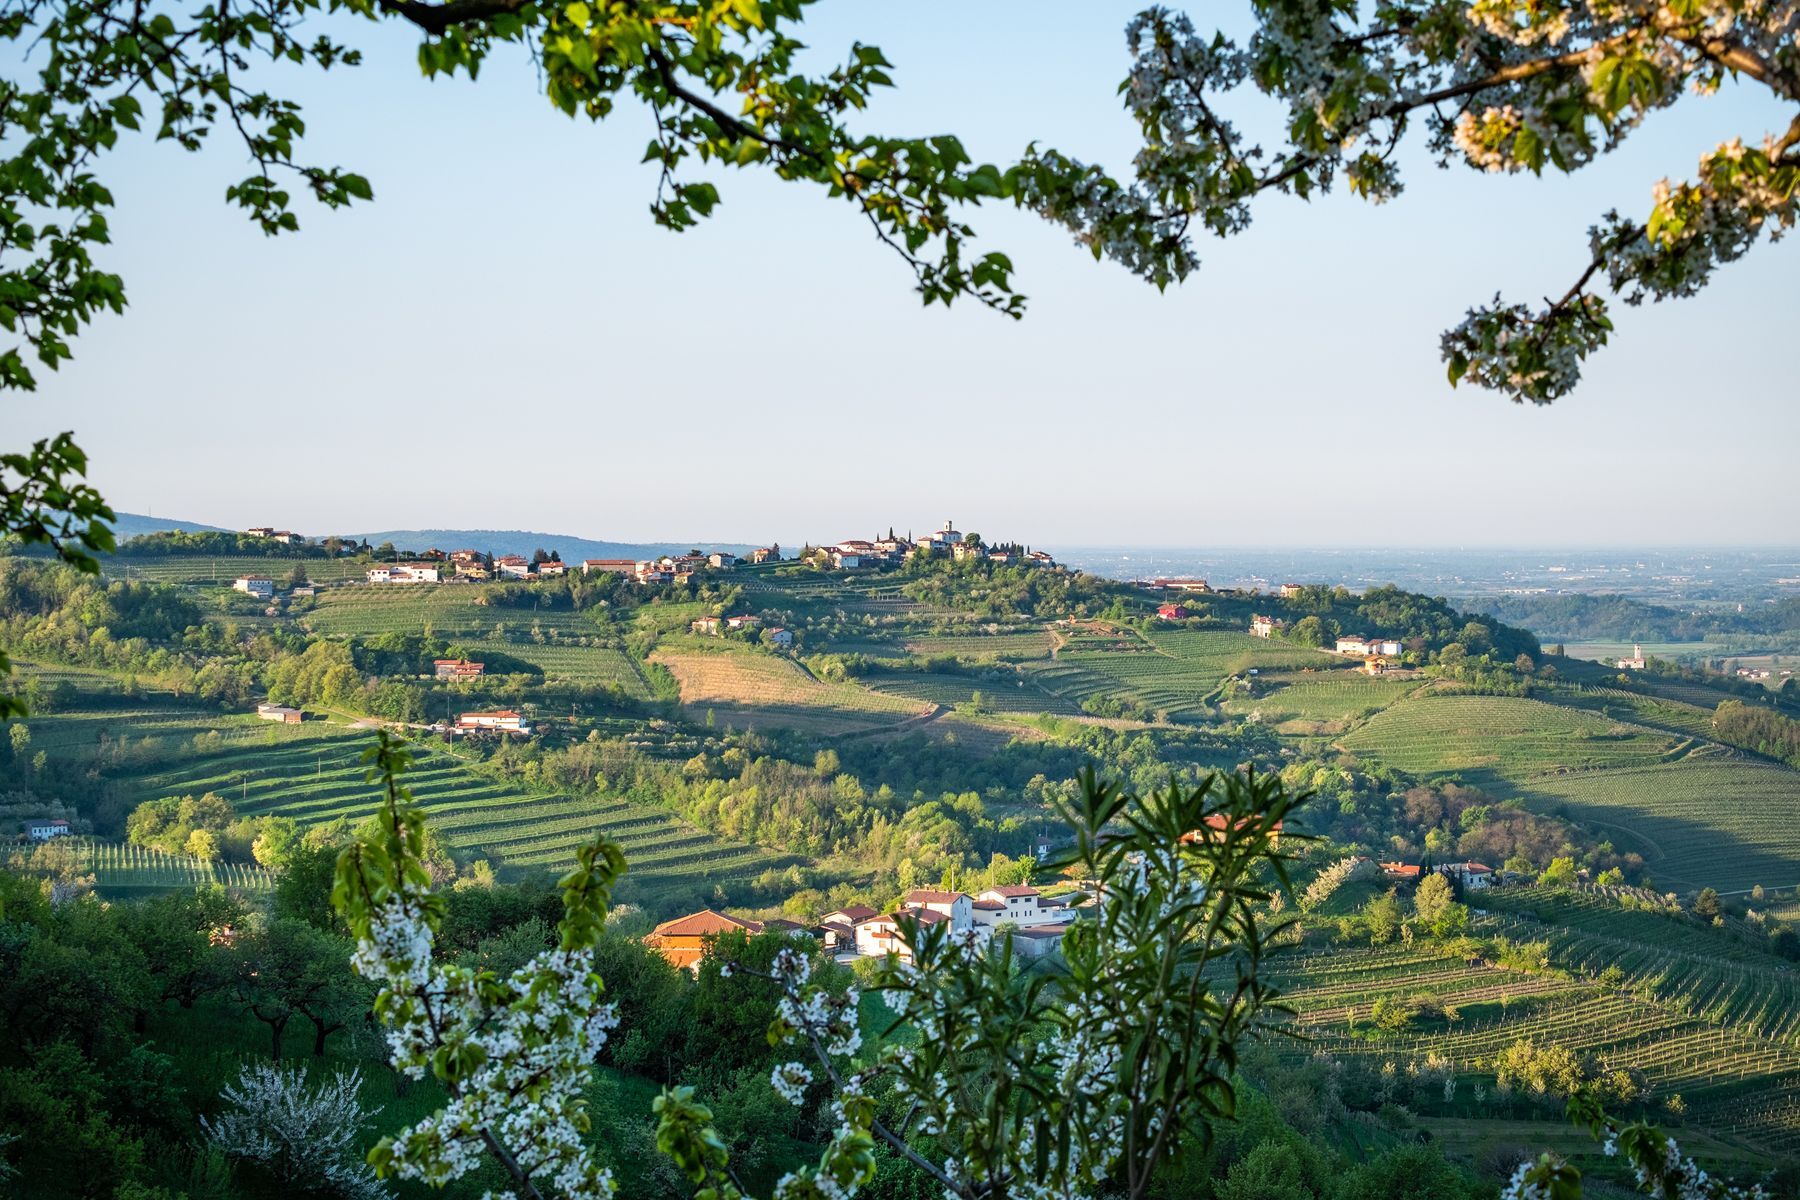 <p>Nicknamed the Tuscany of Slovenia, <a href="https://www.slovenia.info/en/places-to-go/regions/mediterranean-karst-slovenia/brda">Goriška Brda</a> is a can’t-miss destination for wine lovers. Located in western Slovenia, this region is renowned for its rolling green hills, beautiful terraces and, above all, excellent vineyards. Among the award-winning wine varieties you can sip while taking in sweeping views of the local countryside, we recommend a rebula or merlot. Fall is the best time to visit Goriška Brda, as you can catch the grape harvest along with nature’s most flamboyant colours.</p>